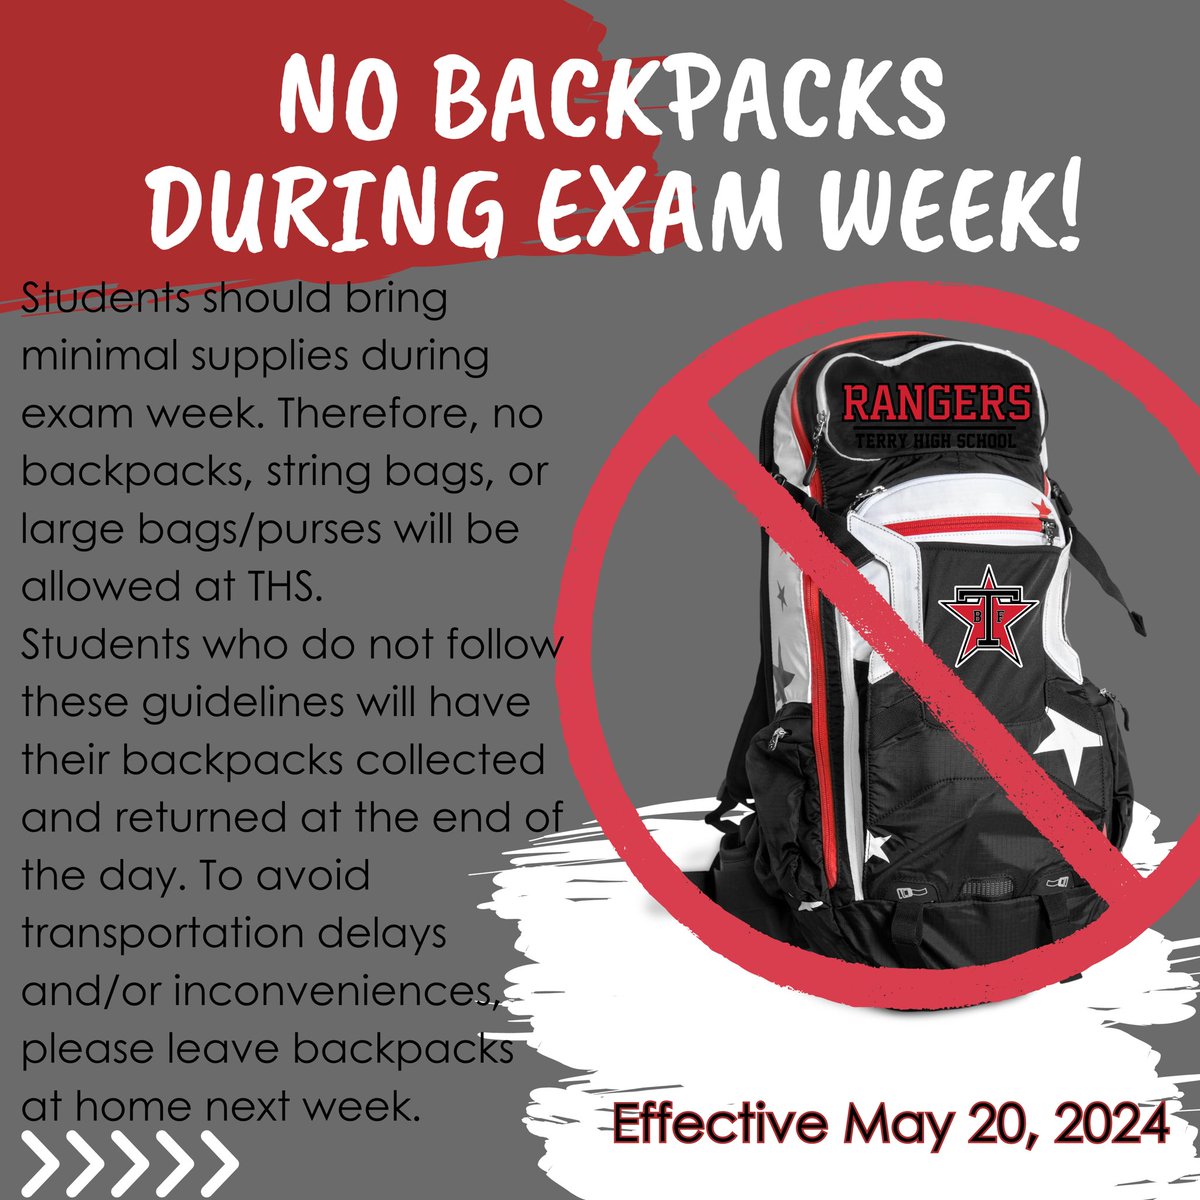 Starting Monday, no backpacks will be allowed on campus. Please see the information below for details. In 2024-25, only clear/mesh backpacks will be allowed on campus.